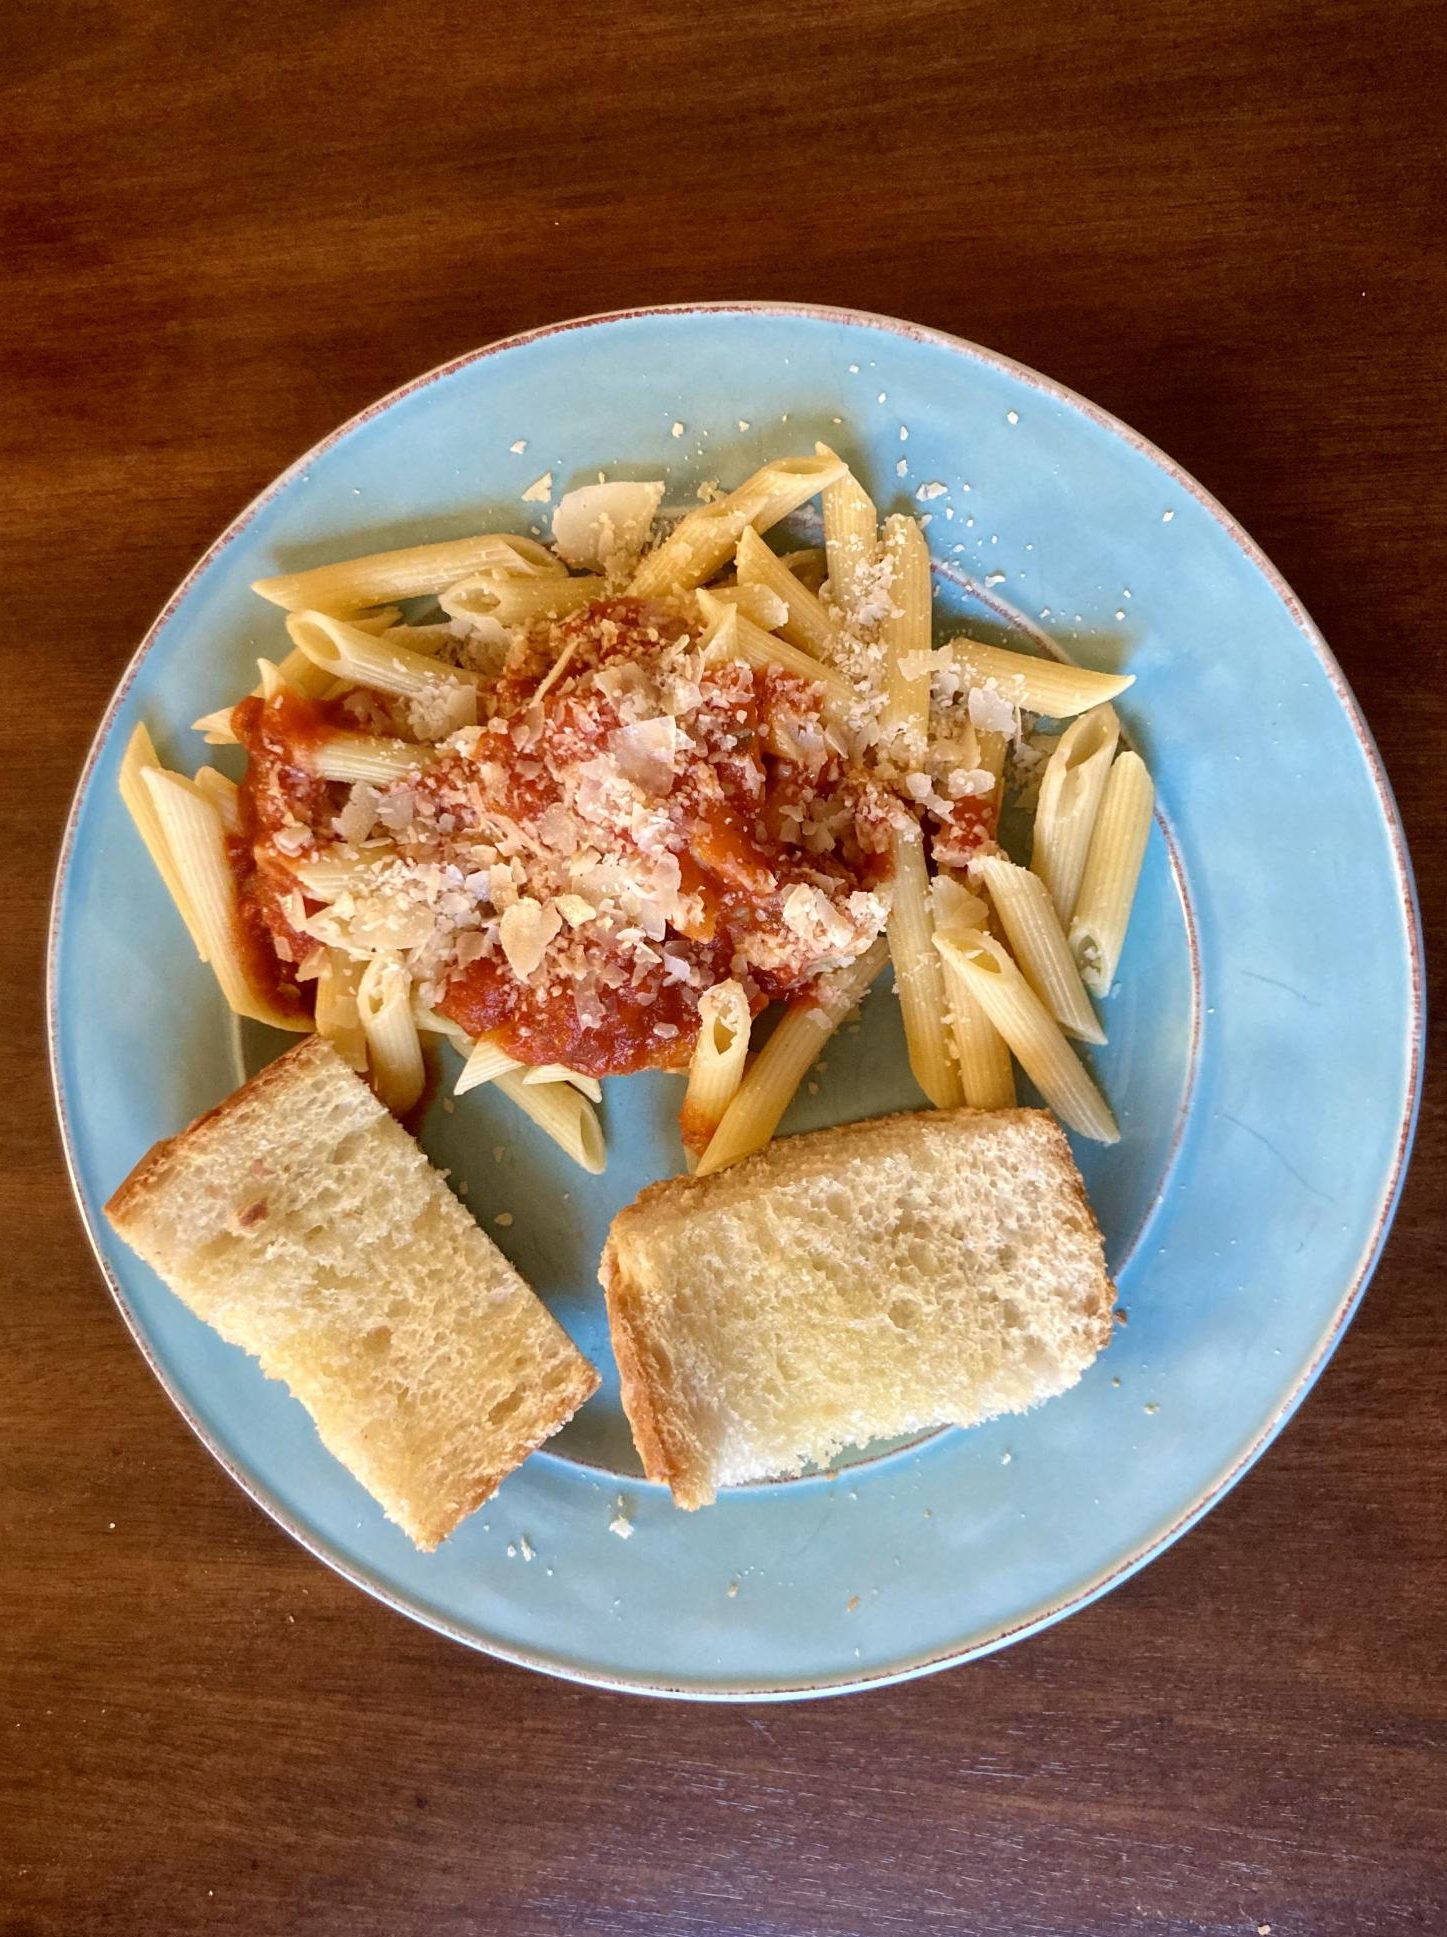 Penne pasta with tomato sauce and garlic bread.